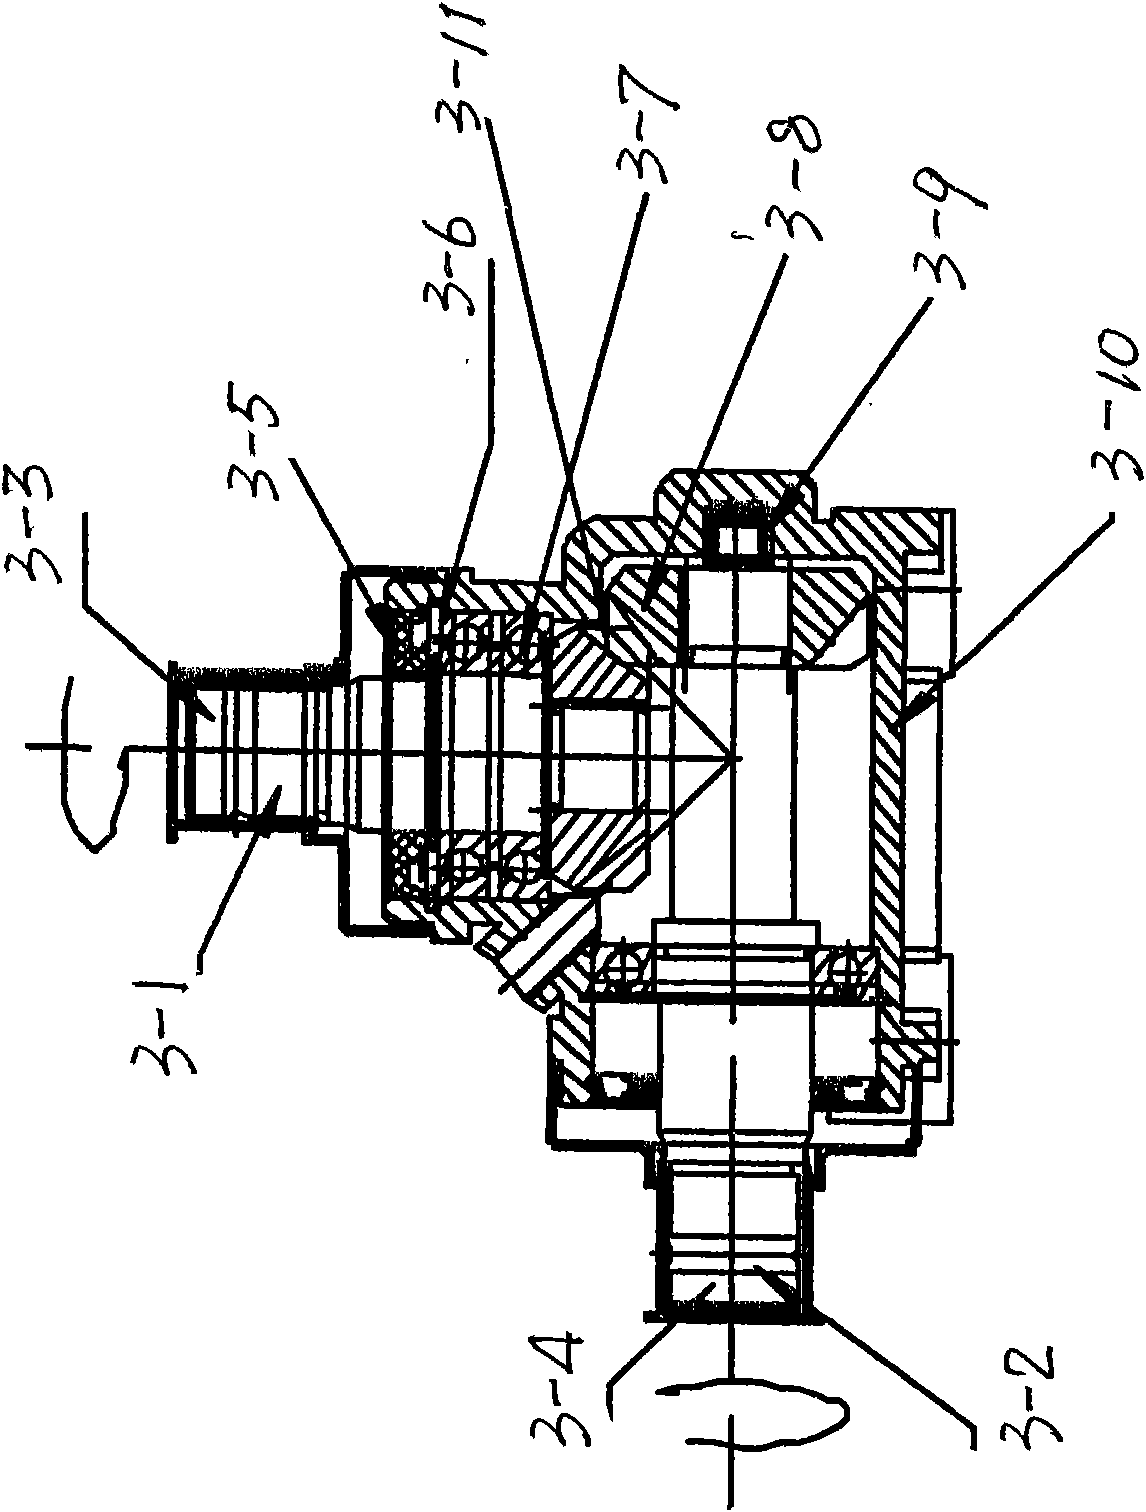 Deflection angle steering reverser of deflection angle of automobile